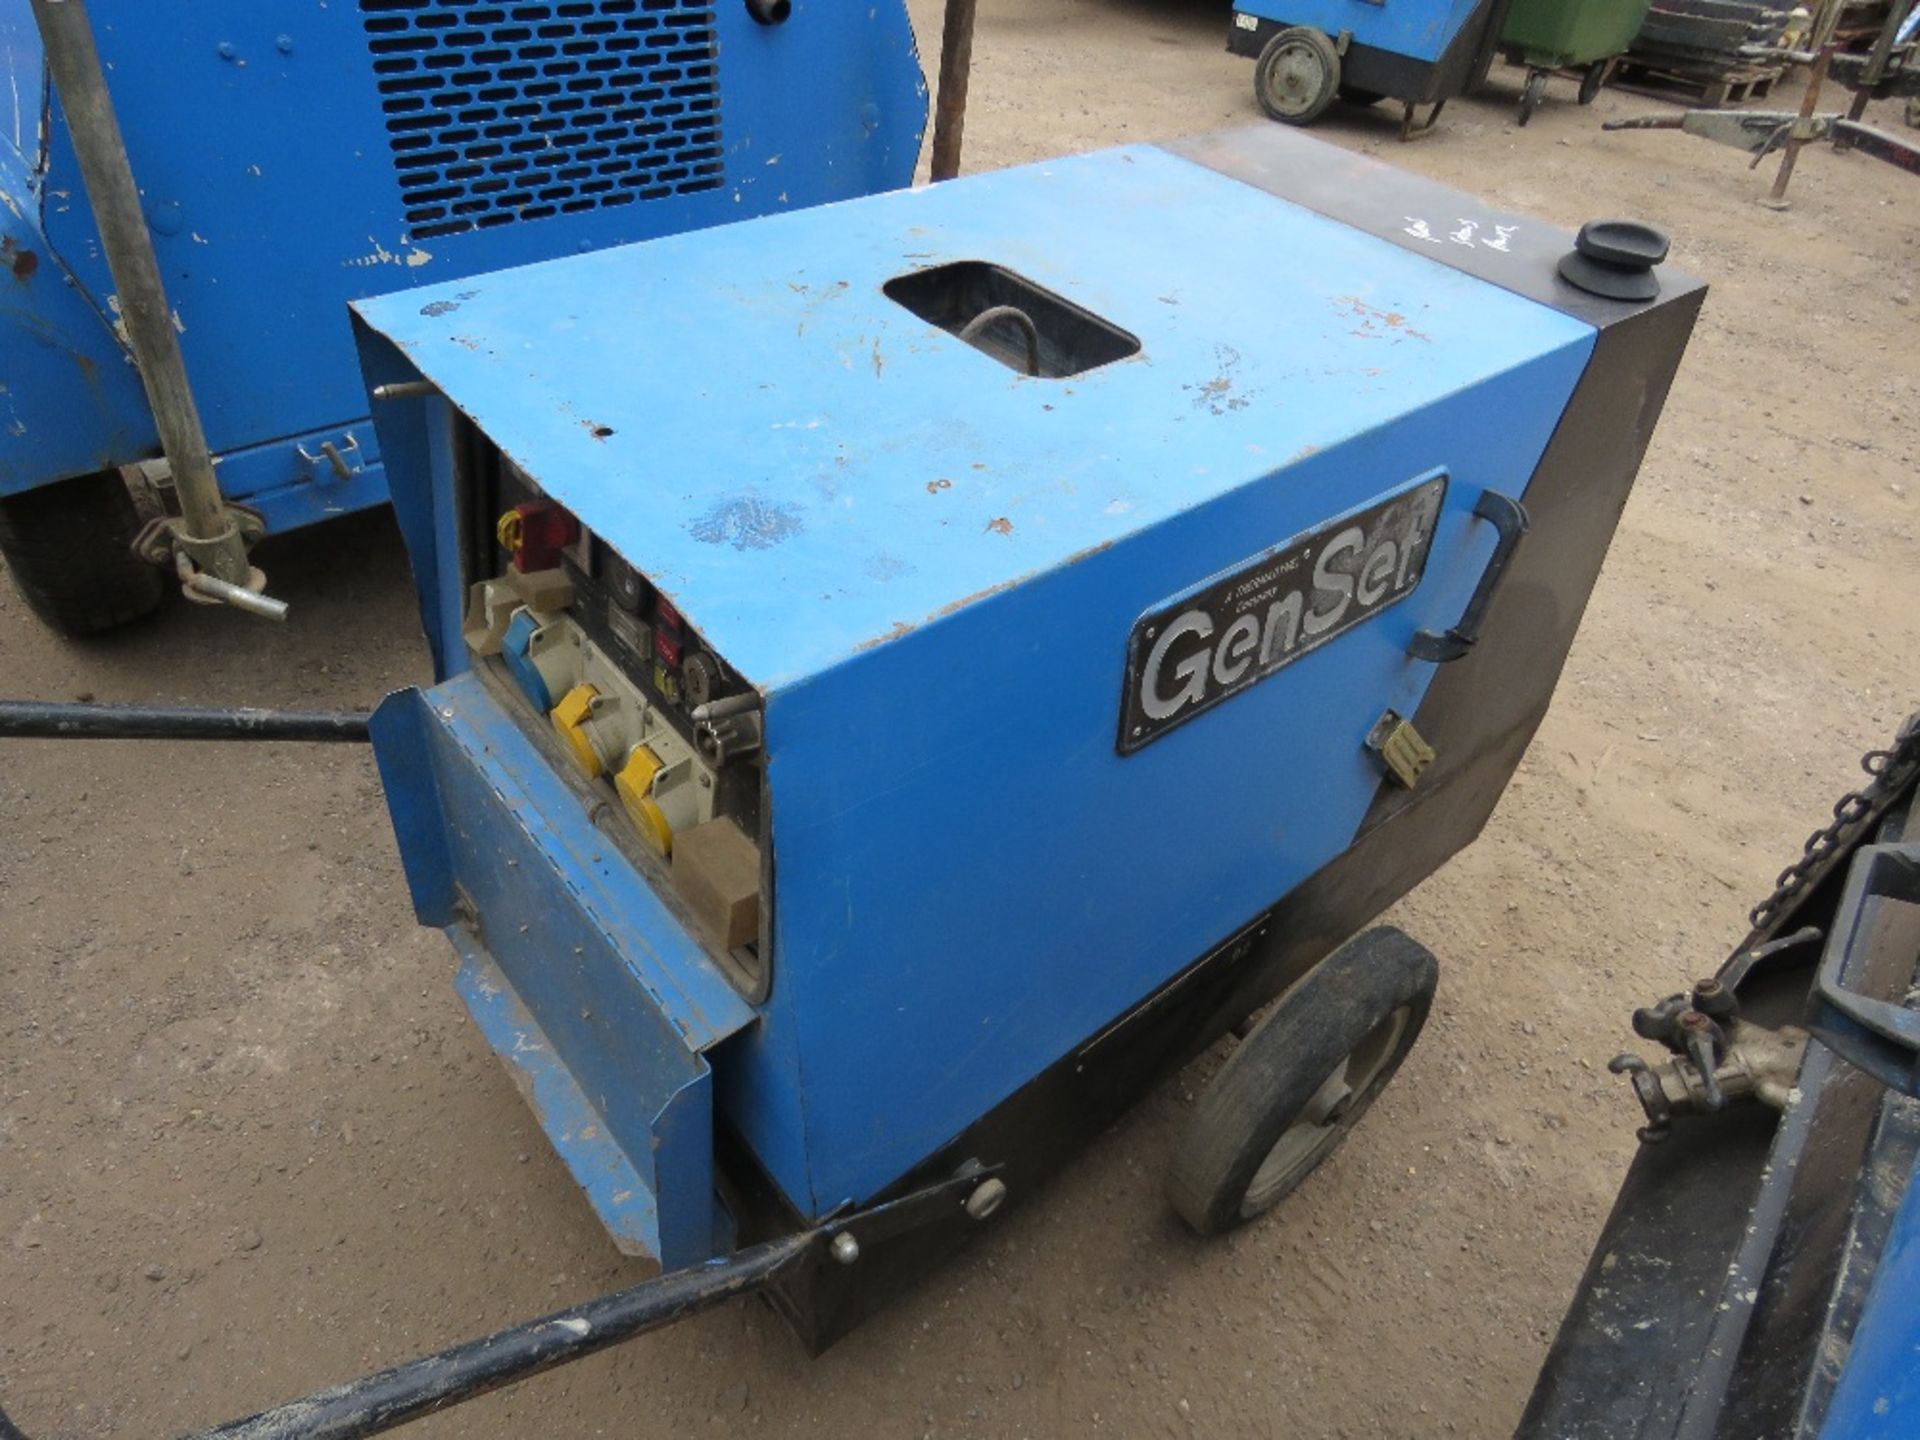 GENSET MGK6000 BARROW GENERATOR. 6KVA. WHEN TESTEDE WAS SEEN TO RUN AND SHOWED POWER ON THE GUAGES.